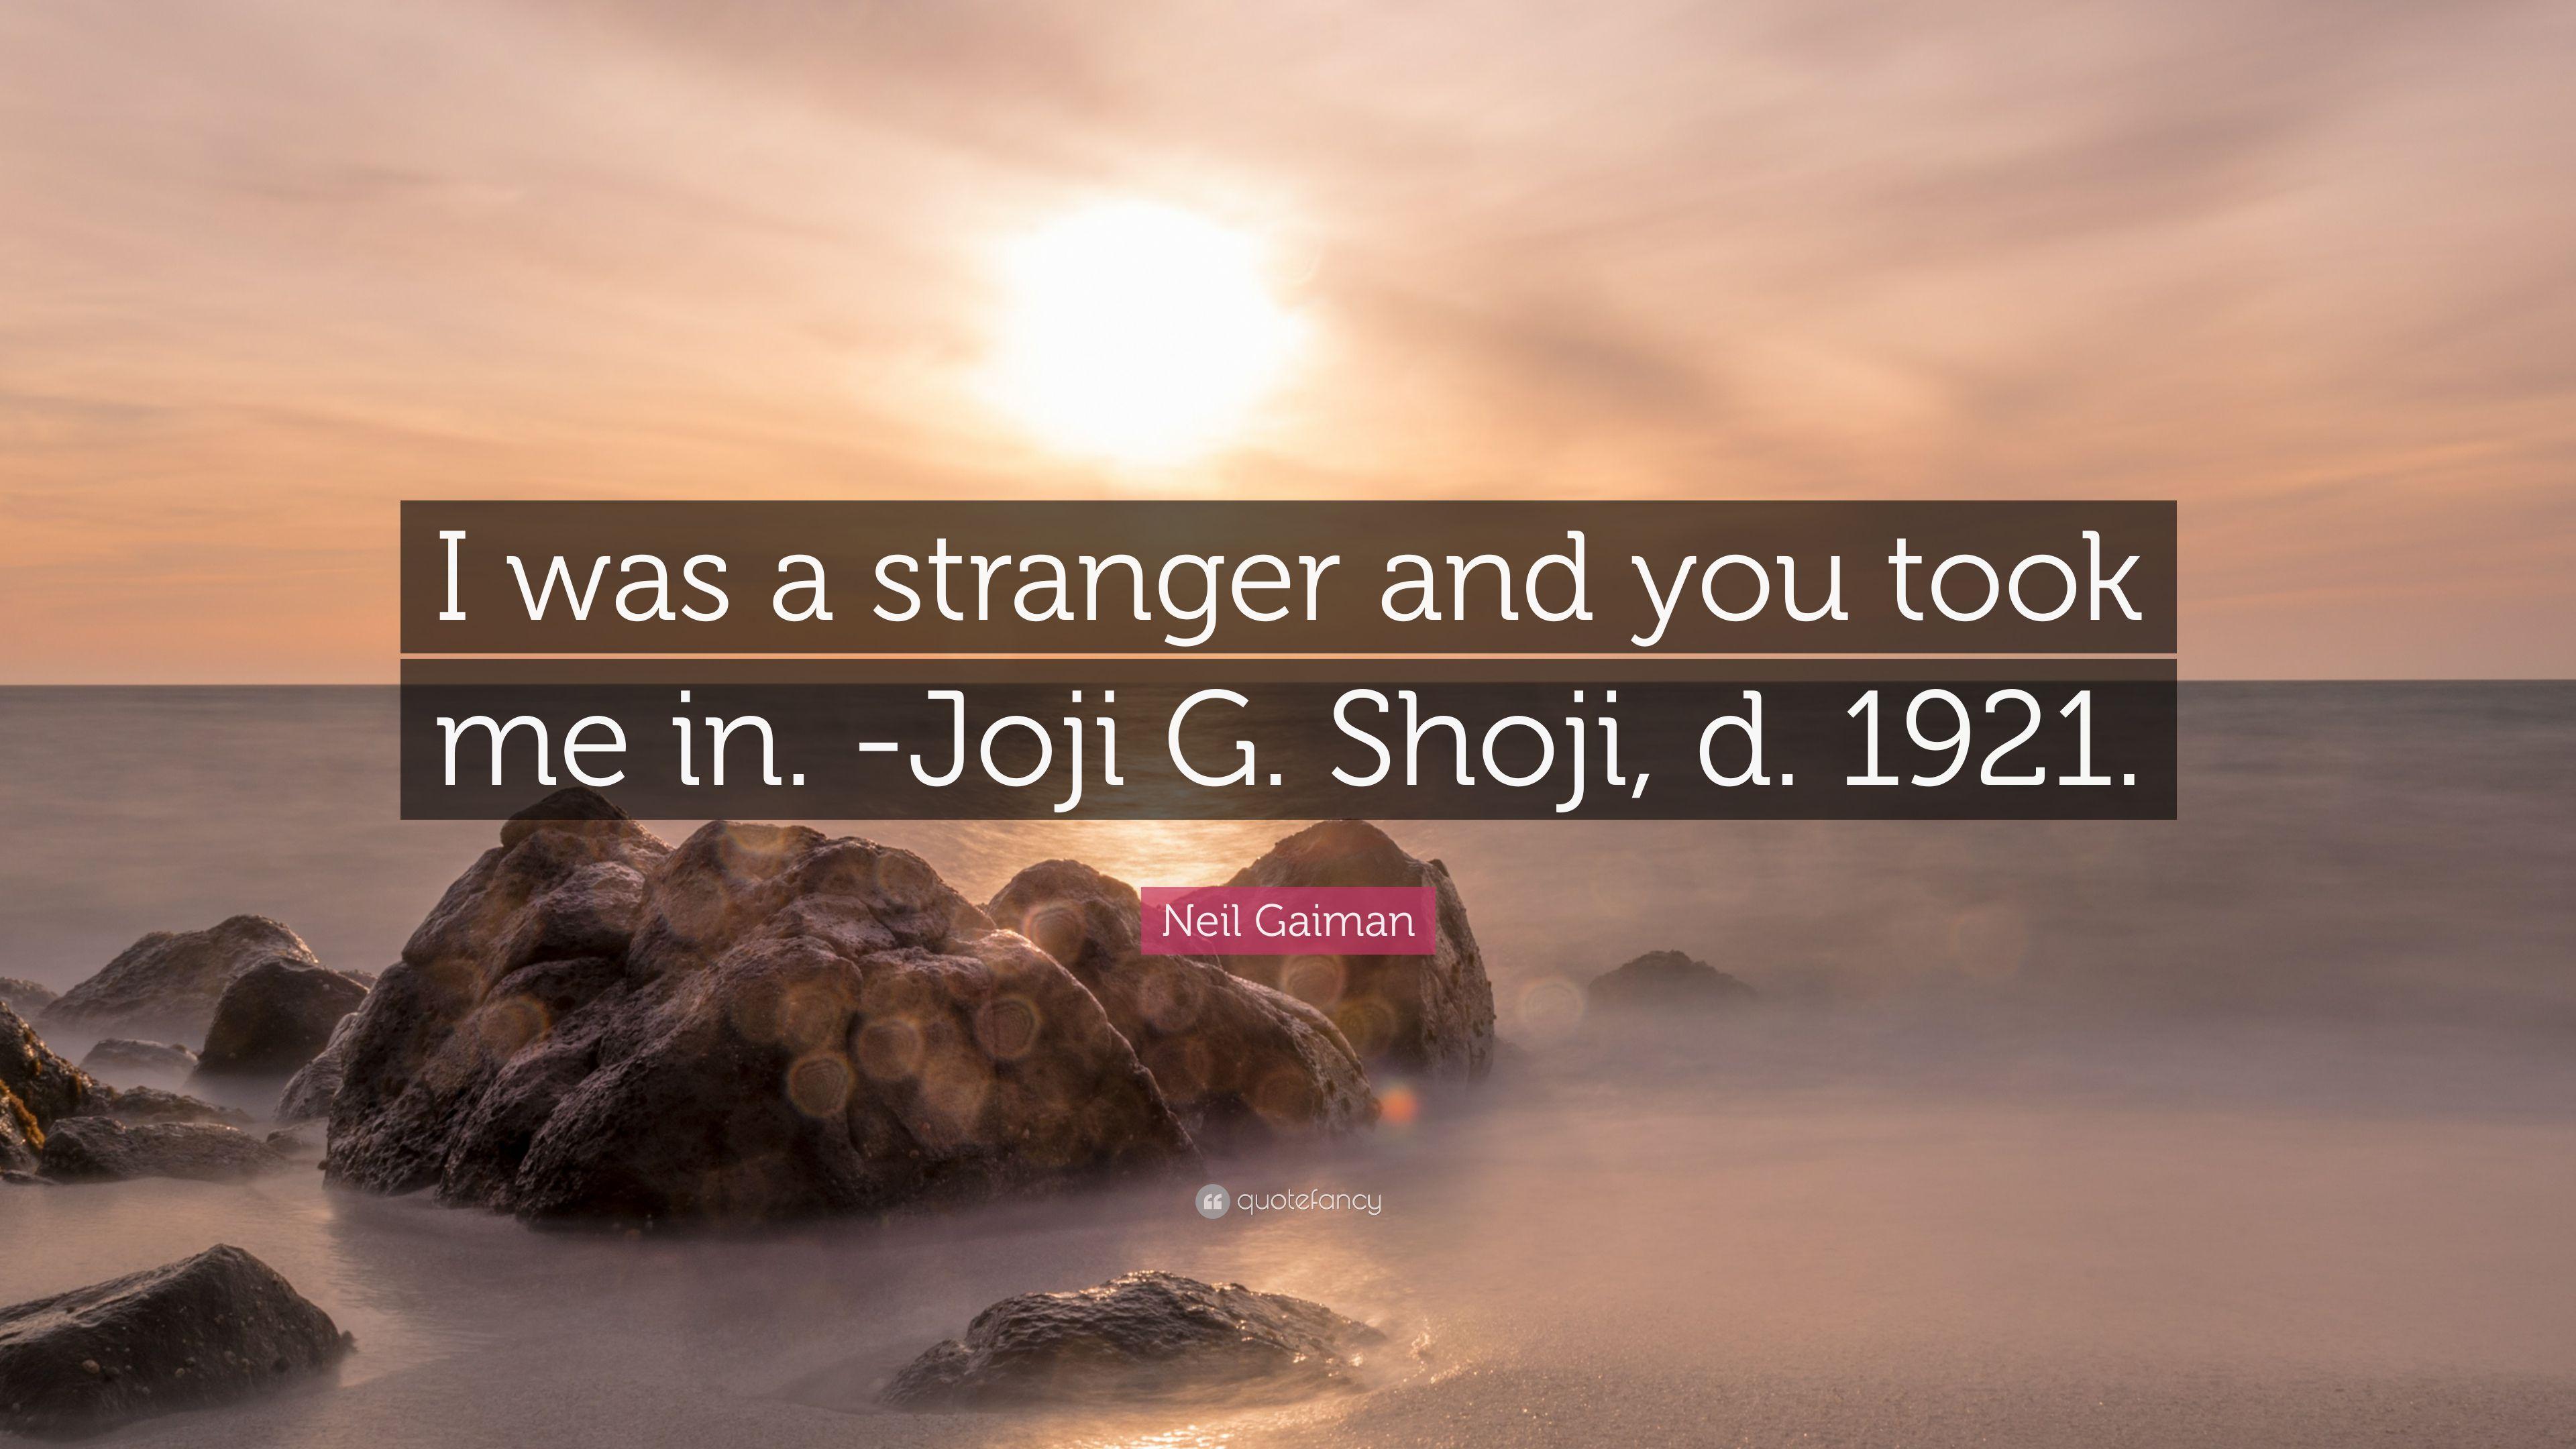 Neil Gaiman Quote: "I was a stranger and you took me in. 